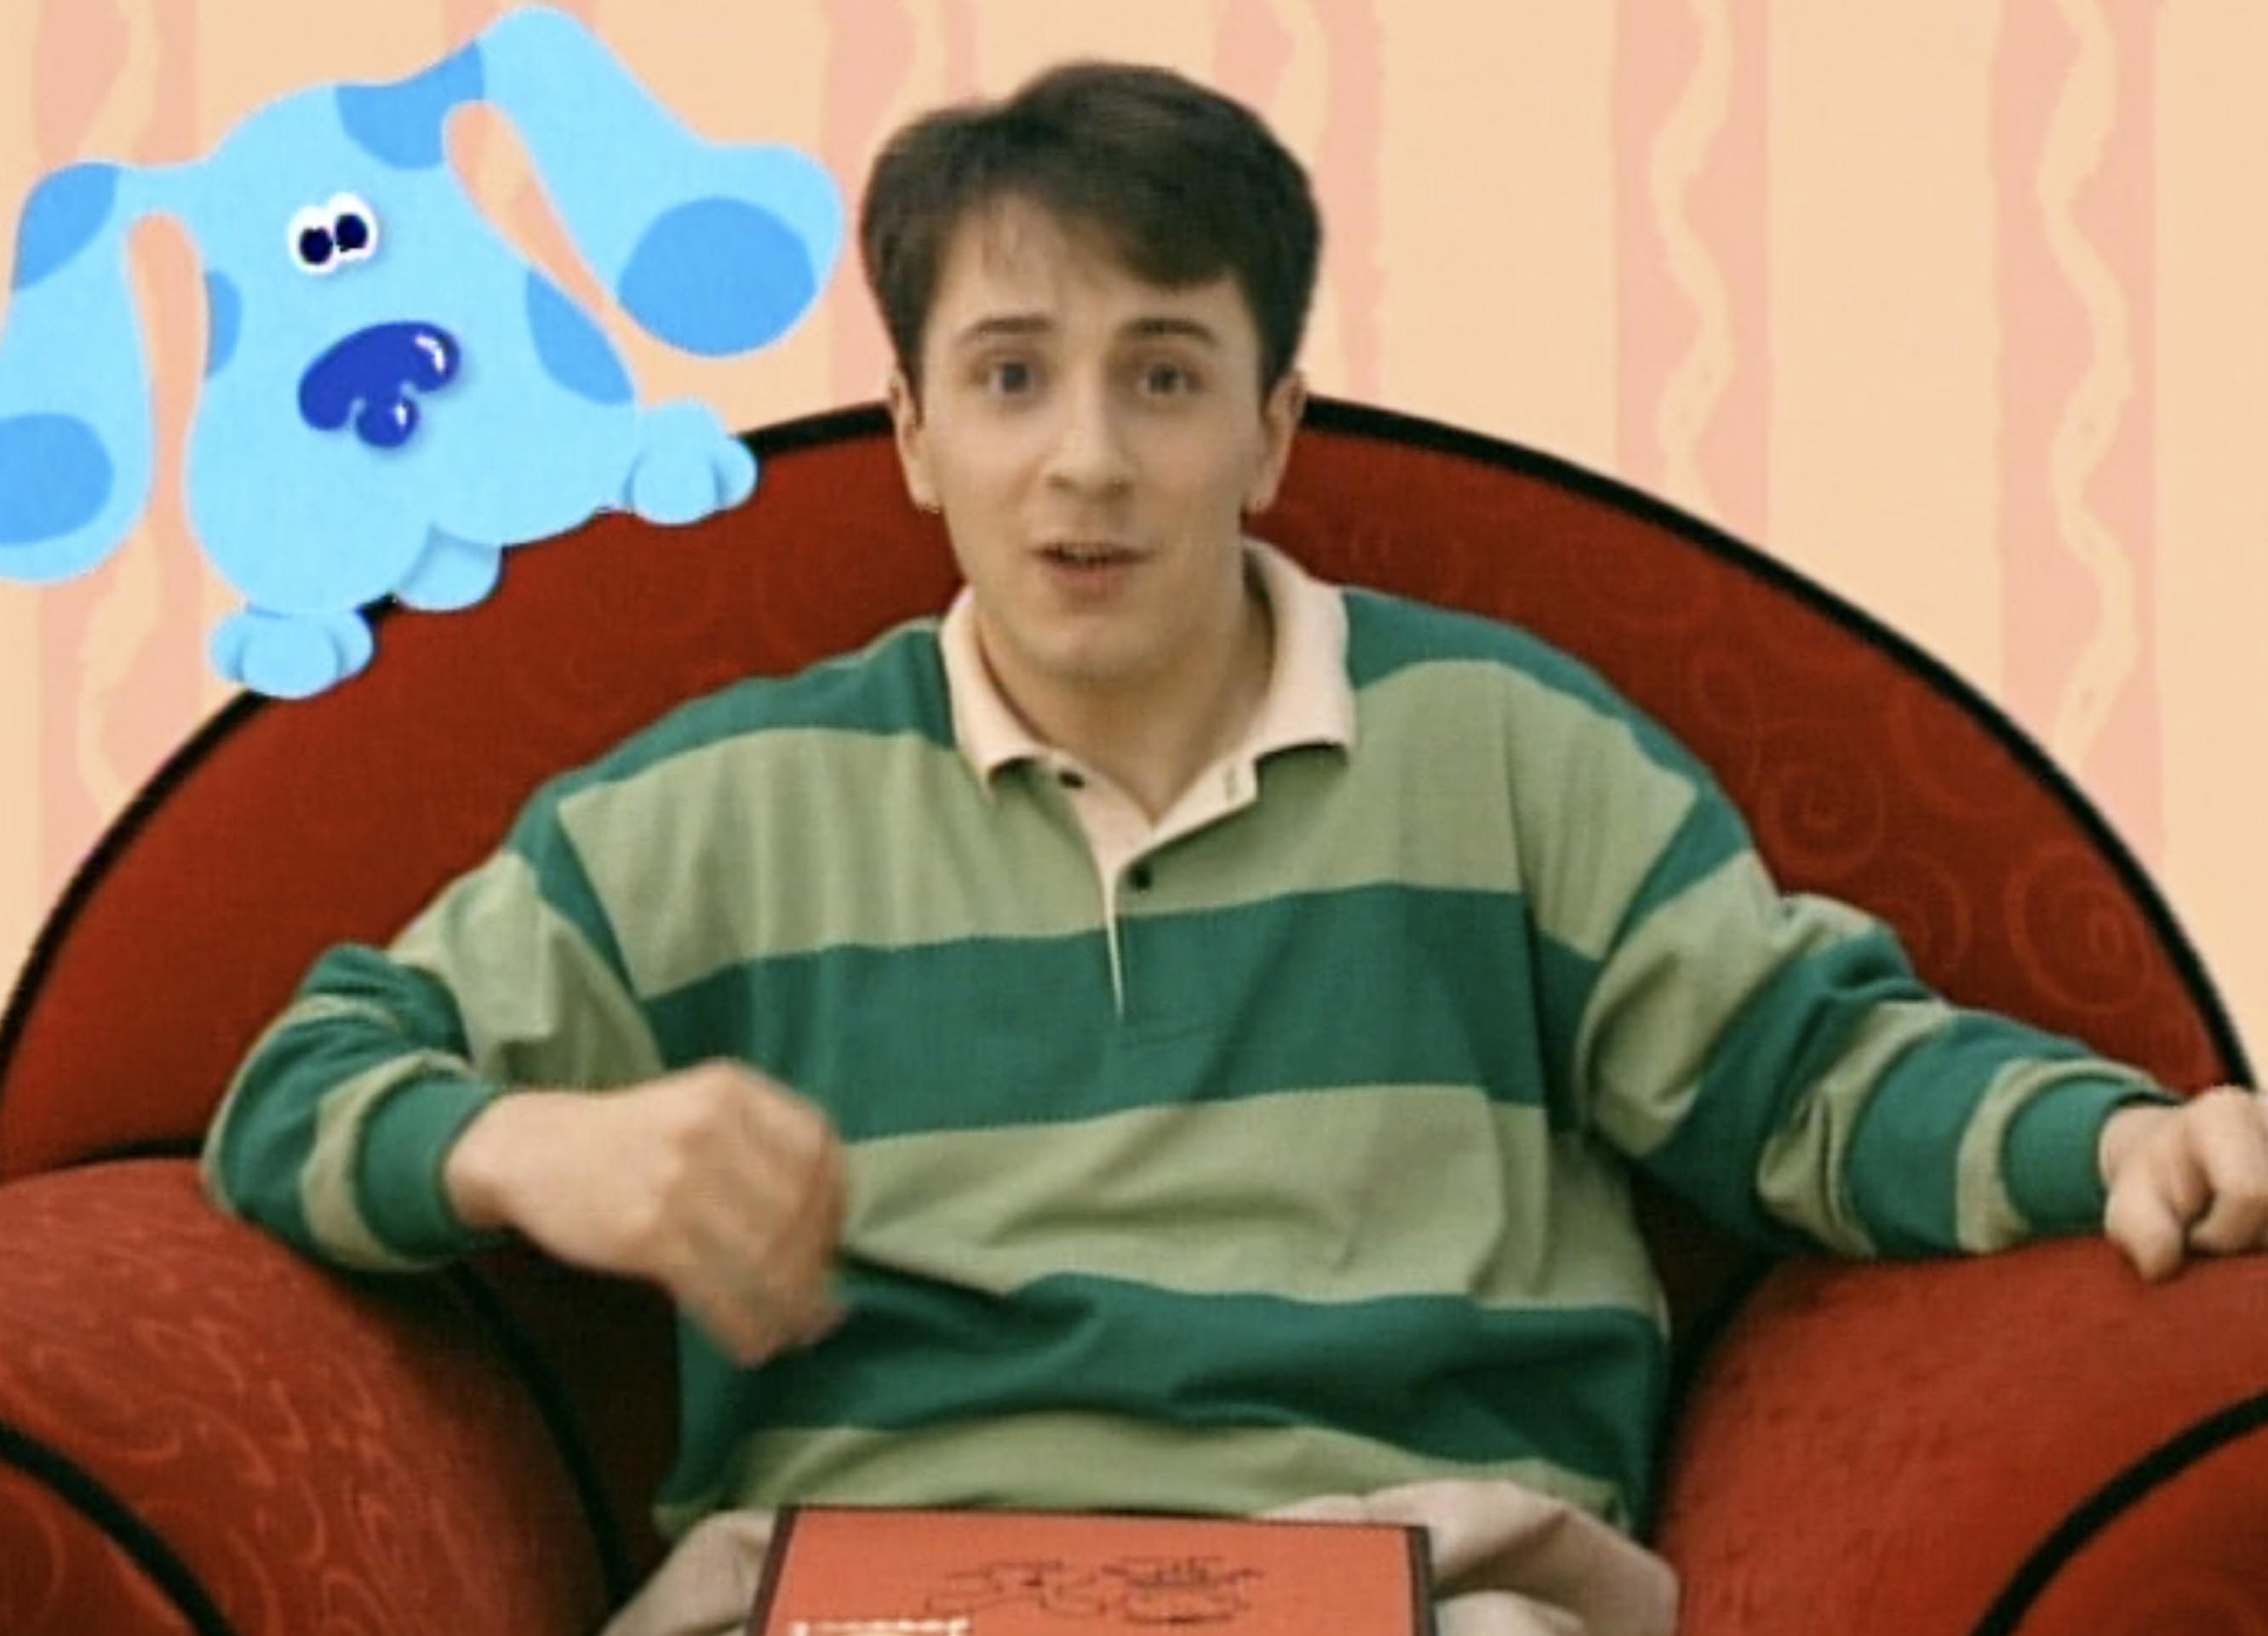 Steve From Blue's Clues On Why He Left Show